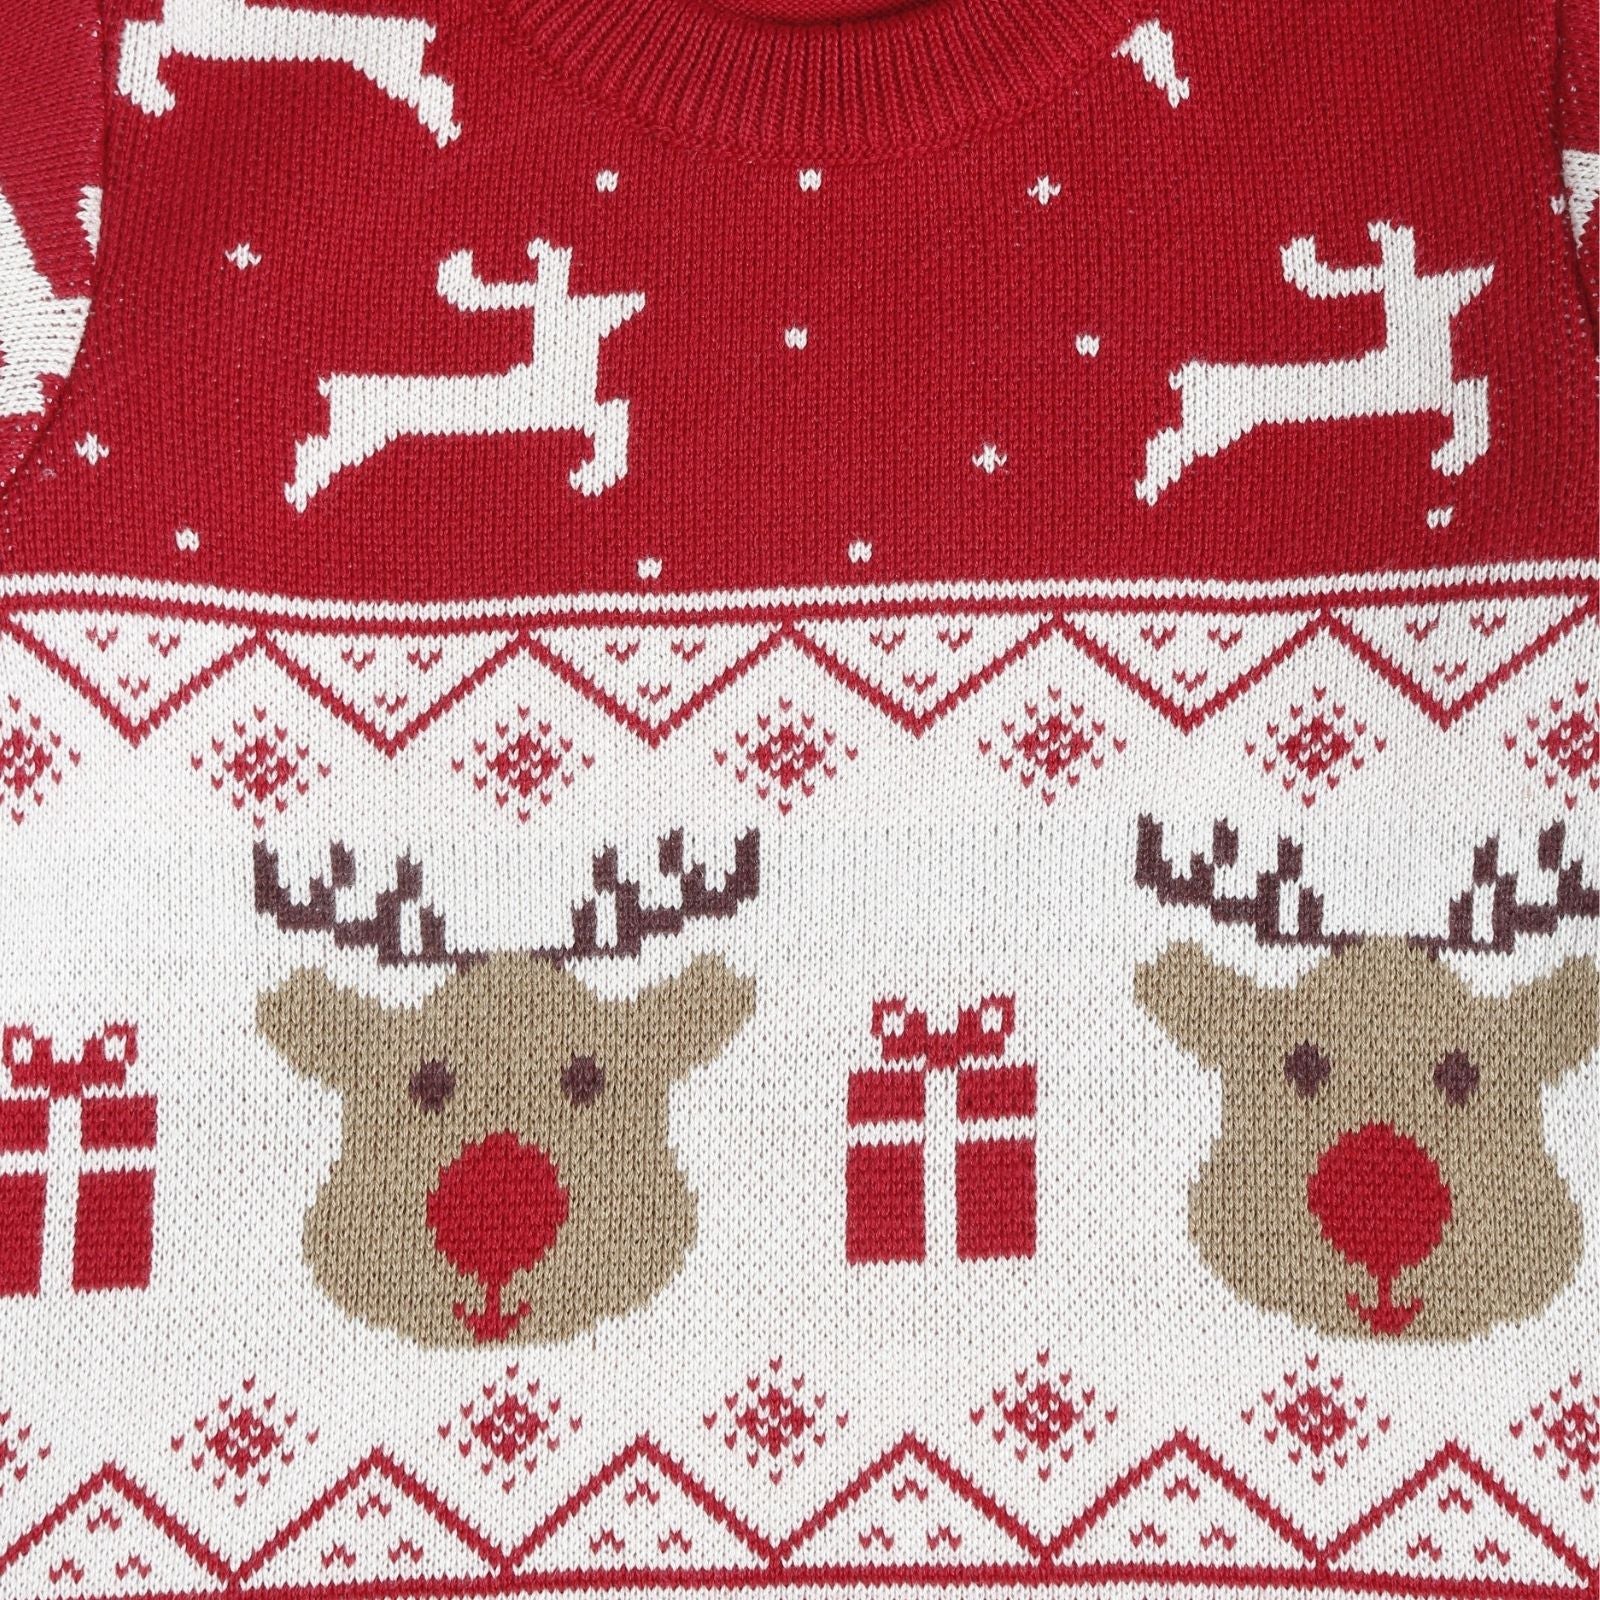 Greendeer Jaunty Reindeer & Hearth Warming Bear 100% Cotton Sweater with  Red Lower Set of 3